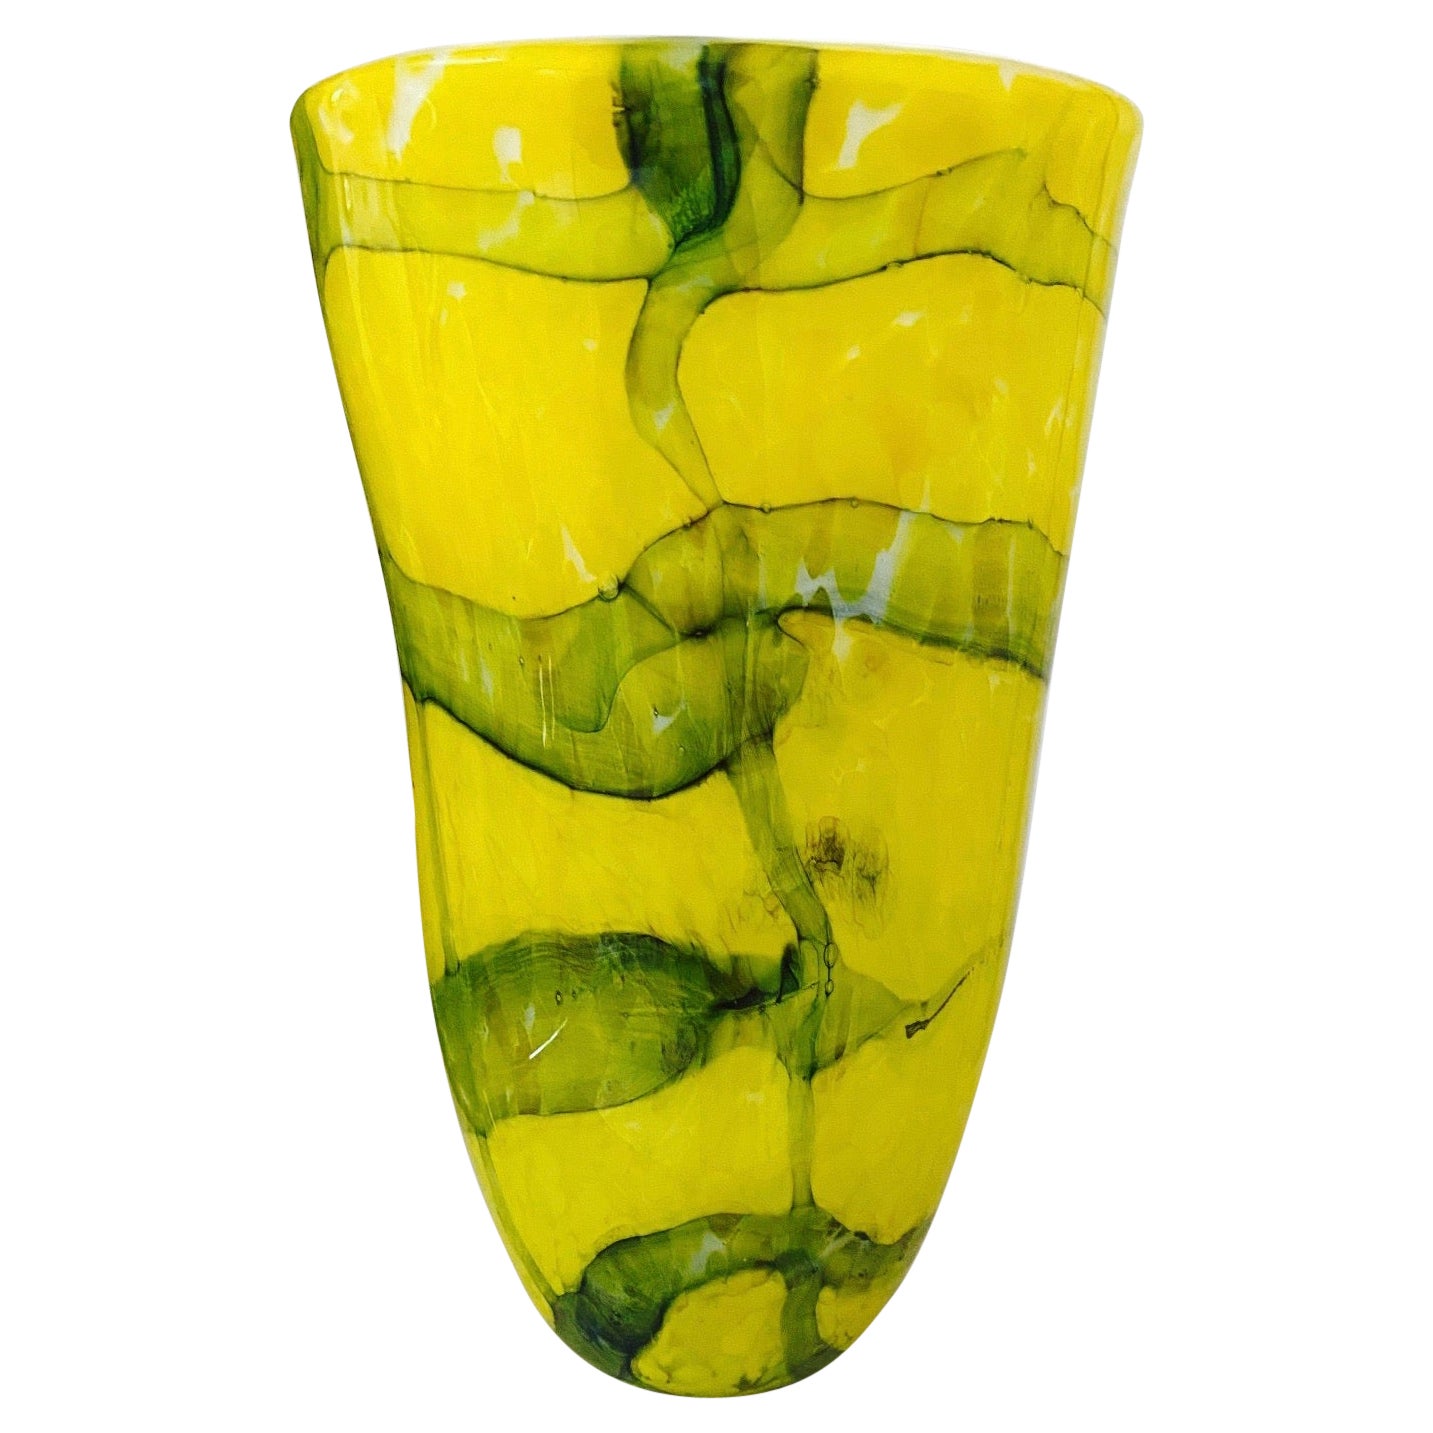 Abstract Murano Glass Vase by Fratelli Toso in Yellow and Green, c. 1980 For Sale